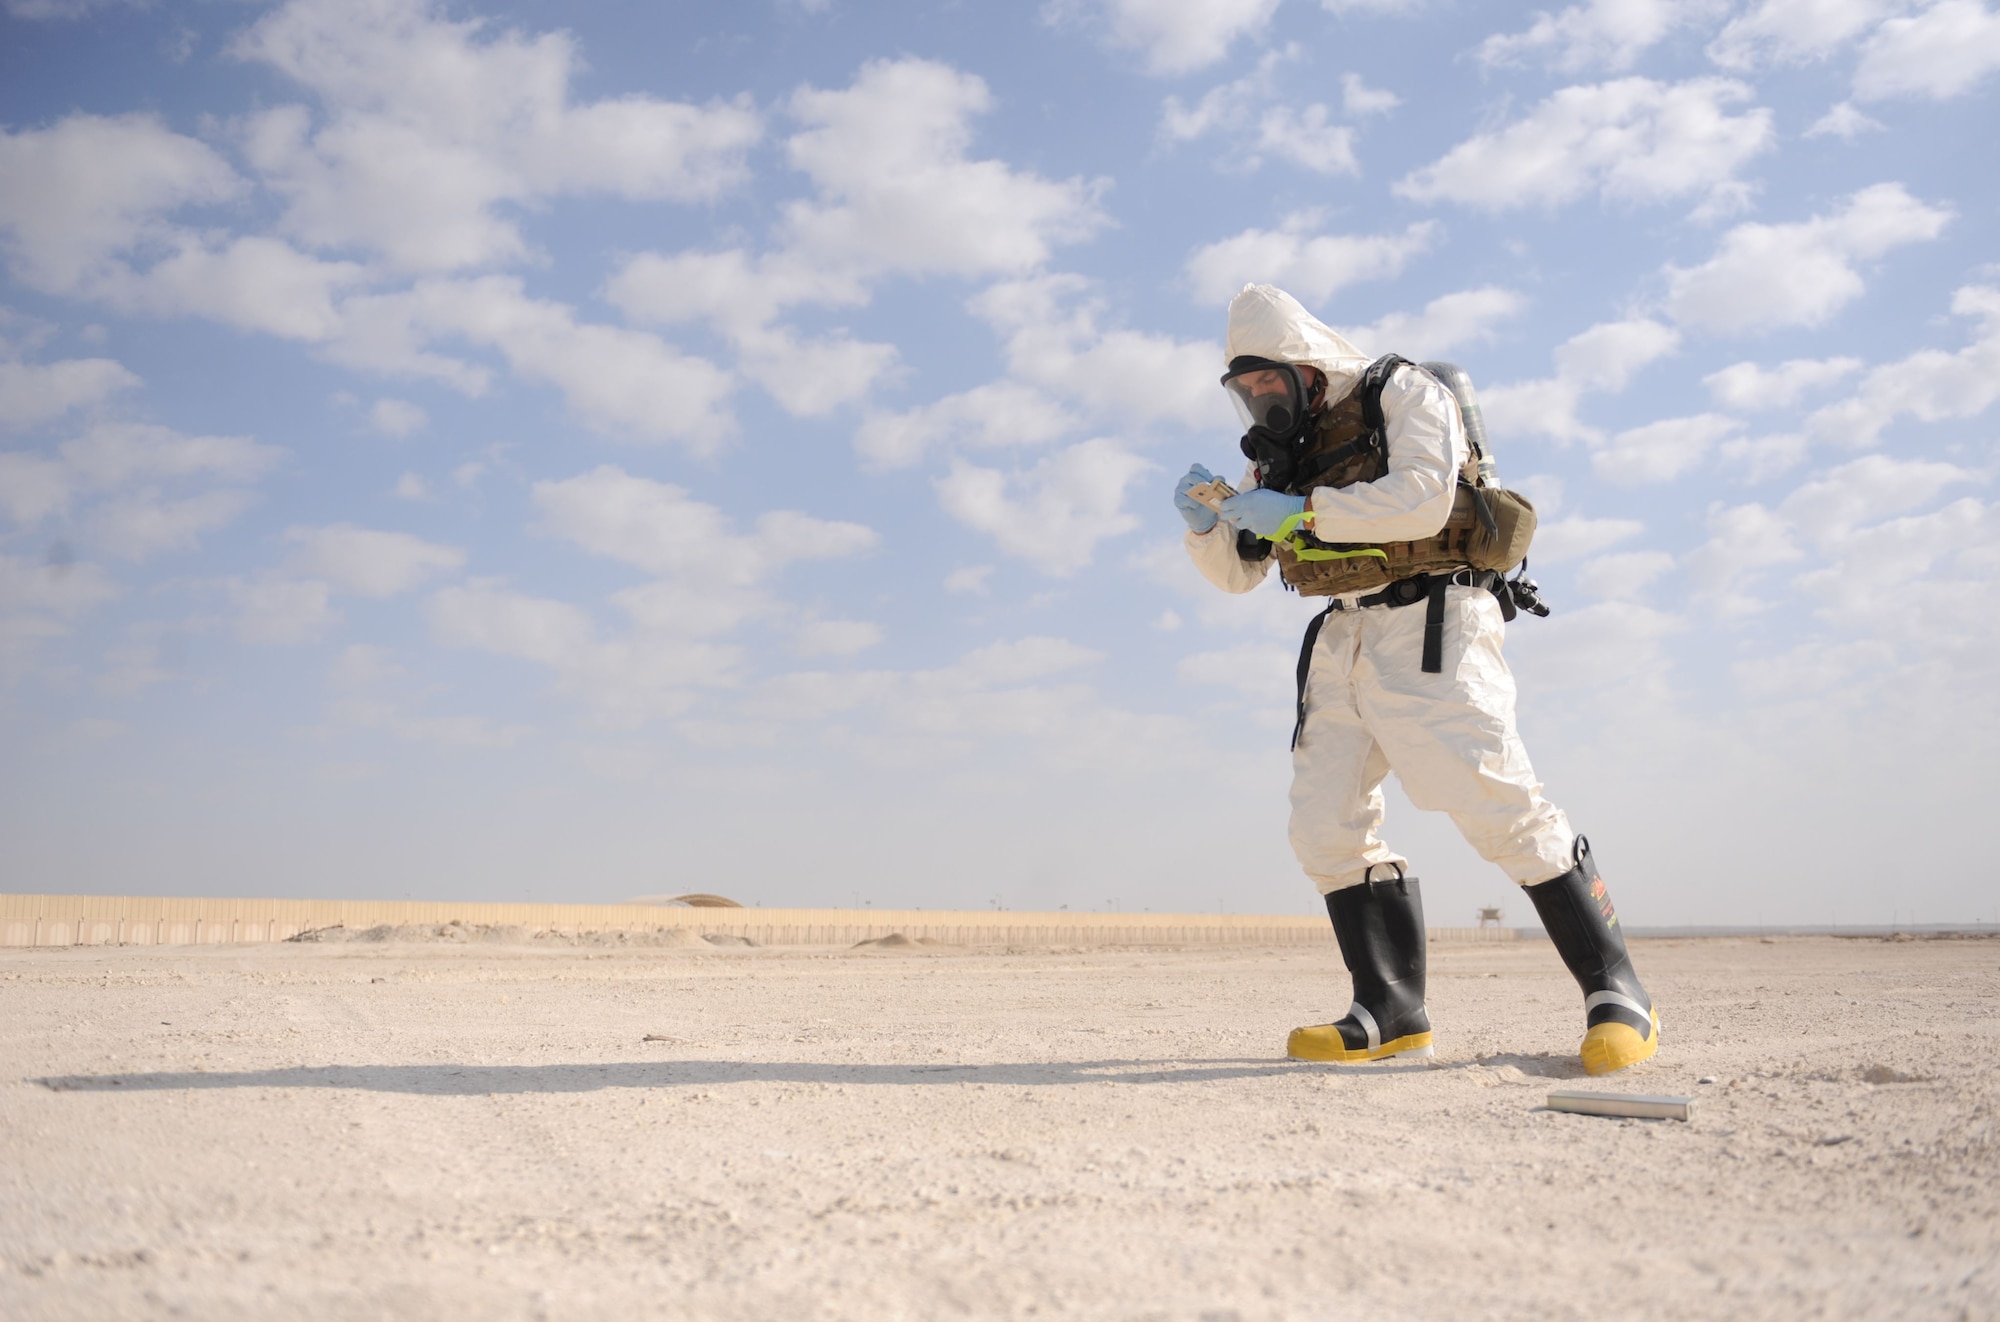 Staff Sgt. Benjamin Young, 380th Expeditionary Civil Engineer Squadron, explosive ordnance disposal, training noncommissioned officer in charge, evaluates the scene of an F-22 Raptor crash during the Major Accident Response Exercise at Al Dhafra Air Base, United Arab Emirates Dec. 15, 2017. EOD is trained to detect, disarm, detonate and dispose of explosive threats. (U.S. Air National Guard Photo by Staff Sgt. Colton Elliott)